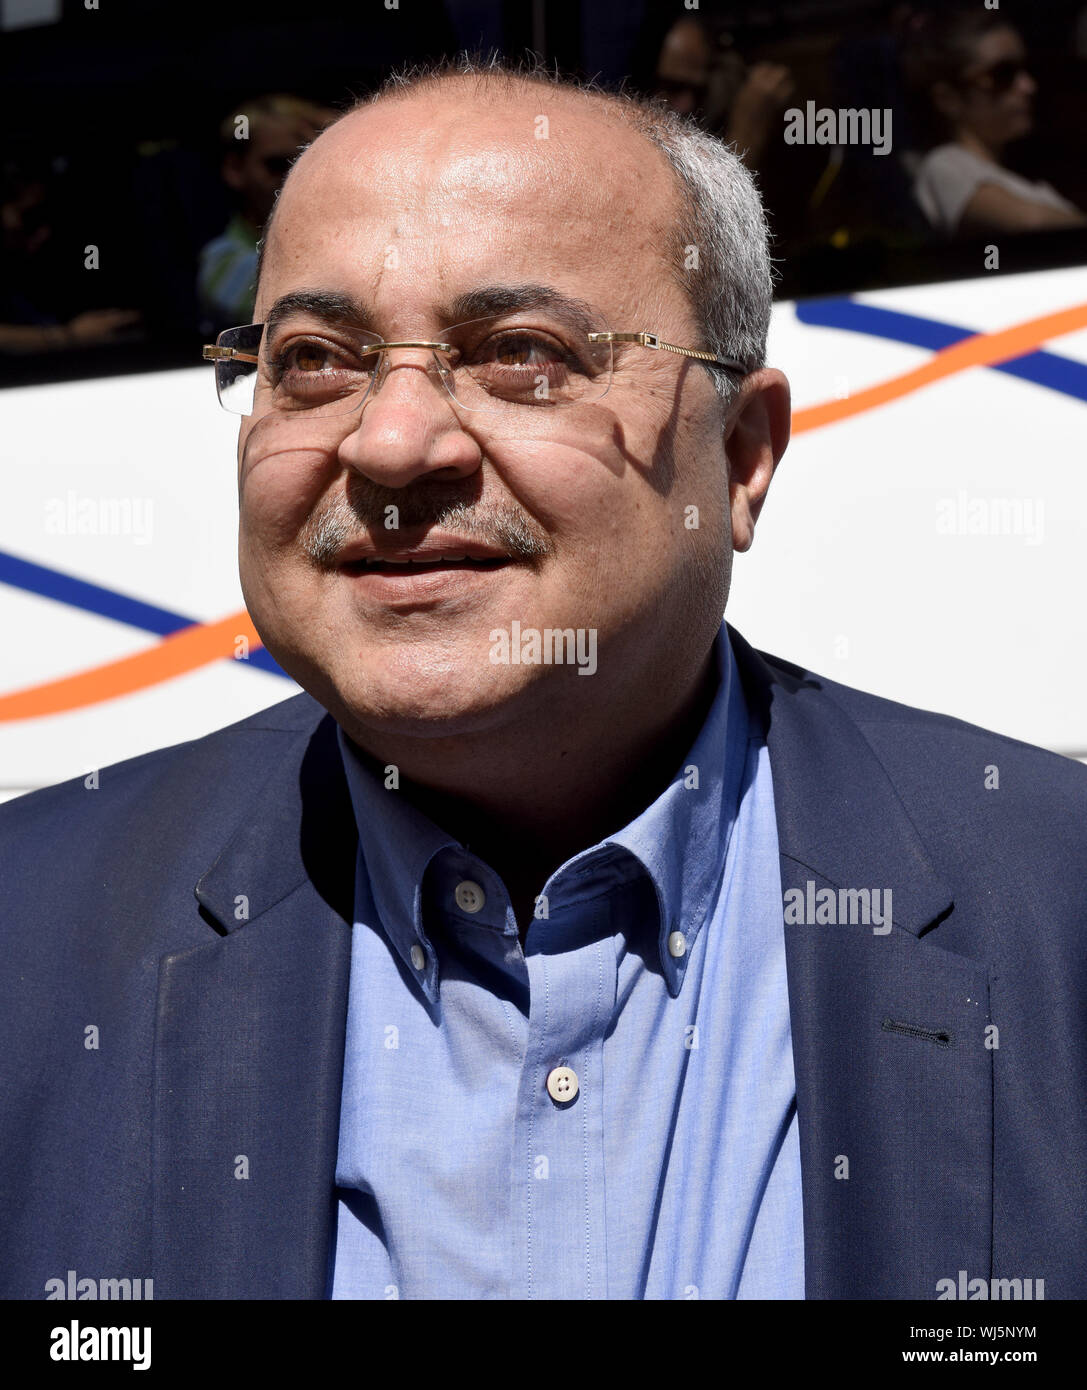 Jerusalem, Israel. 3rd Sep 2019. Israeli Arab politician, Amhed Tibi, a leader in the Joint List Party, arrives to speak to the international press about the upcoming national elections, on Tuesday, September 3, 2019, in East Jerusalem. The Joint List is an alliance of the main Arab parties. Israeli Arabs make up about 20 percent of the country's 9 million citizens. Israelis return to the polls on September 17, for the second national election in 2019.  Photo by Debbie Hill/UPI Credit: UPI/Alamy Live News Stock Photo